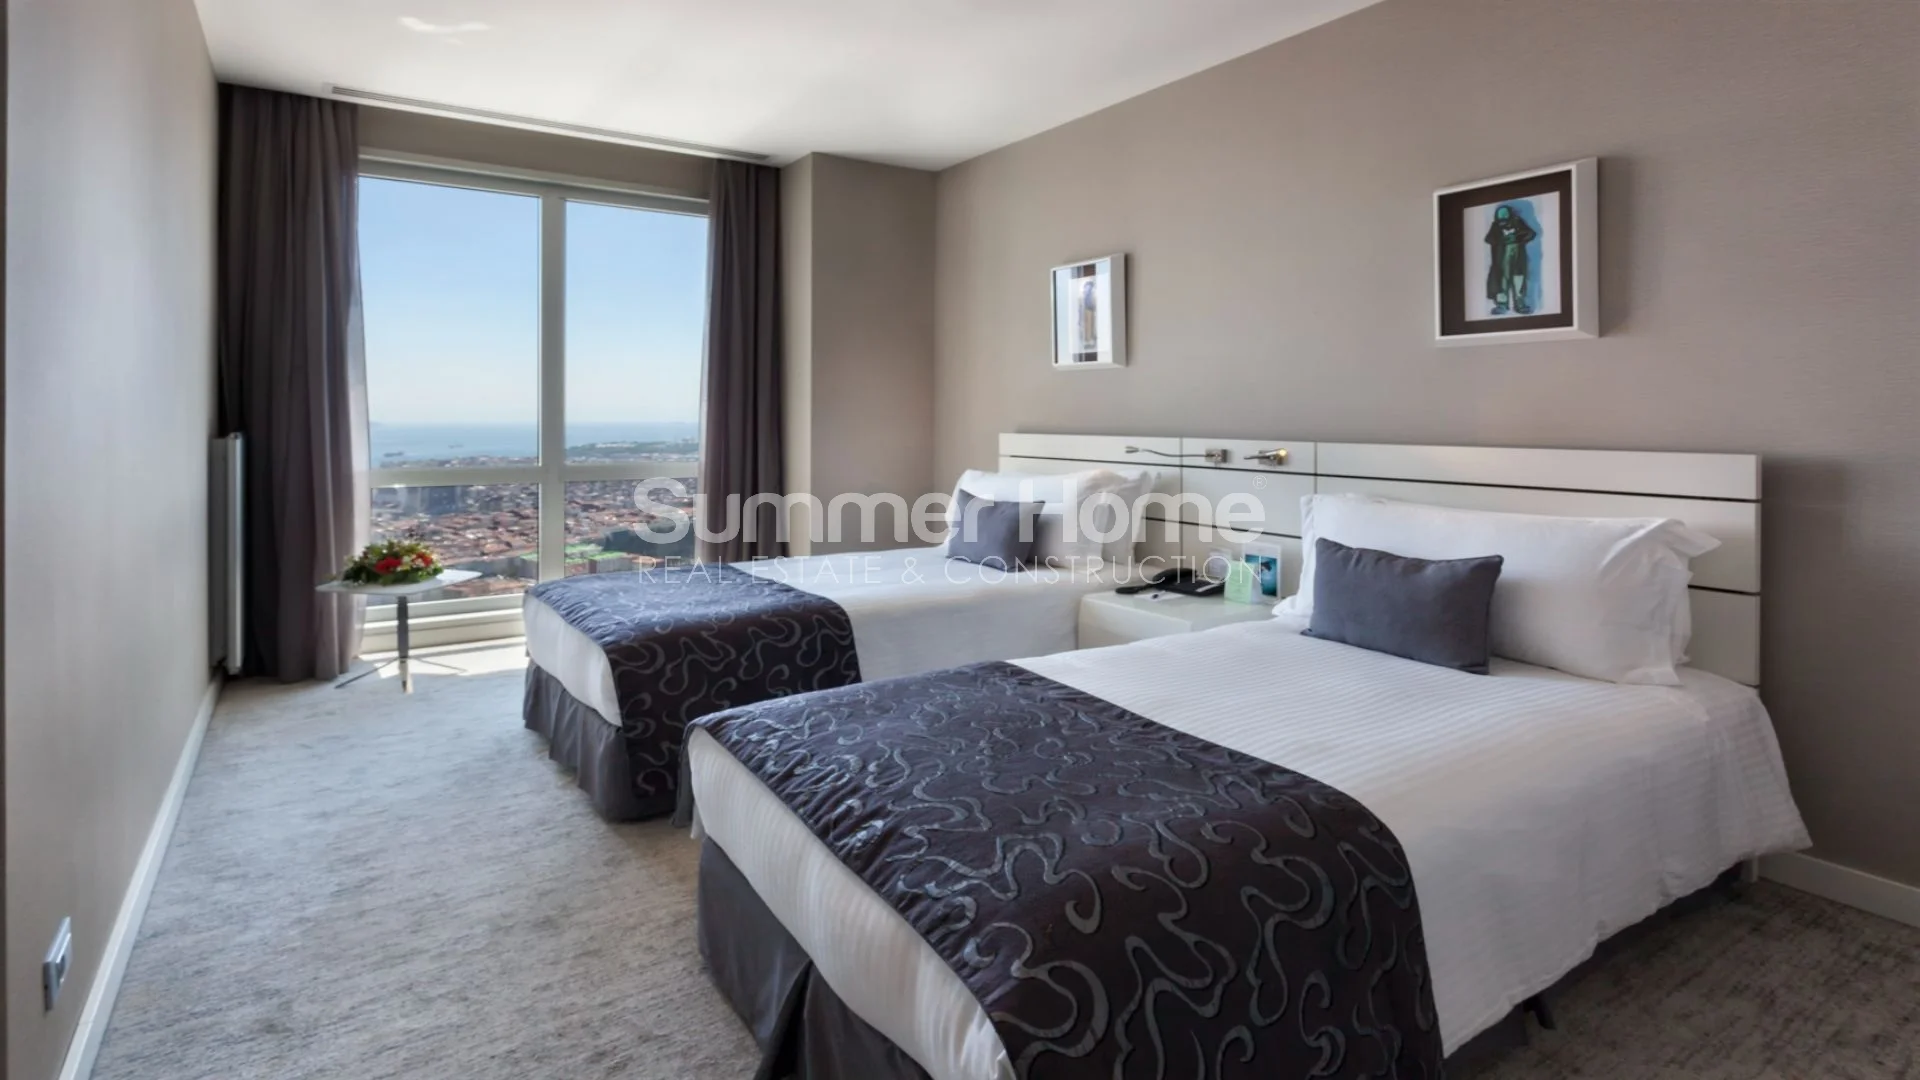 Exceptional apartments in Sisli district of Istanbul Interior - 8